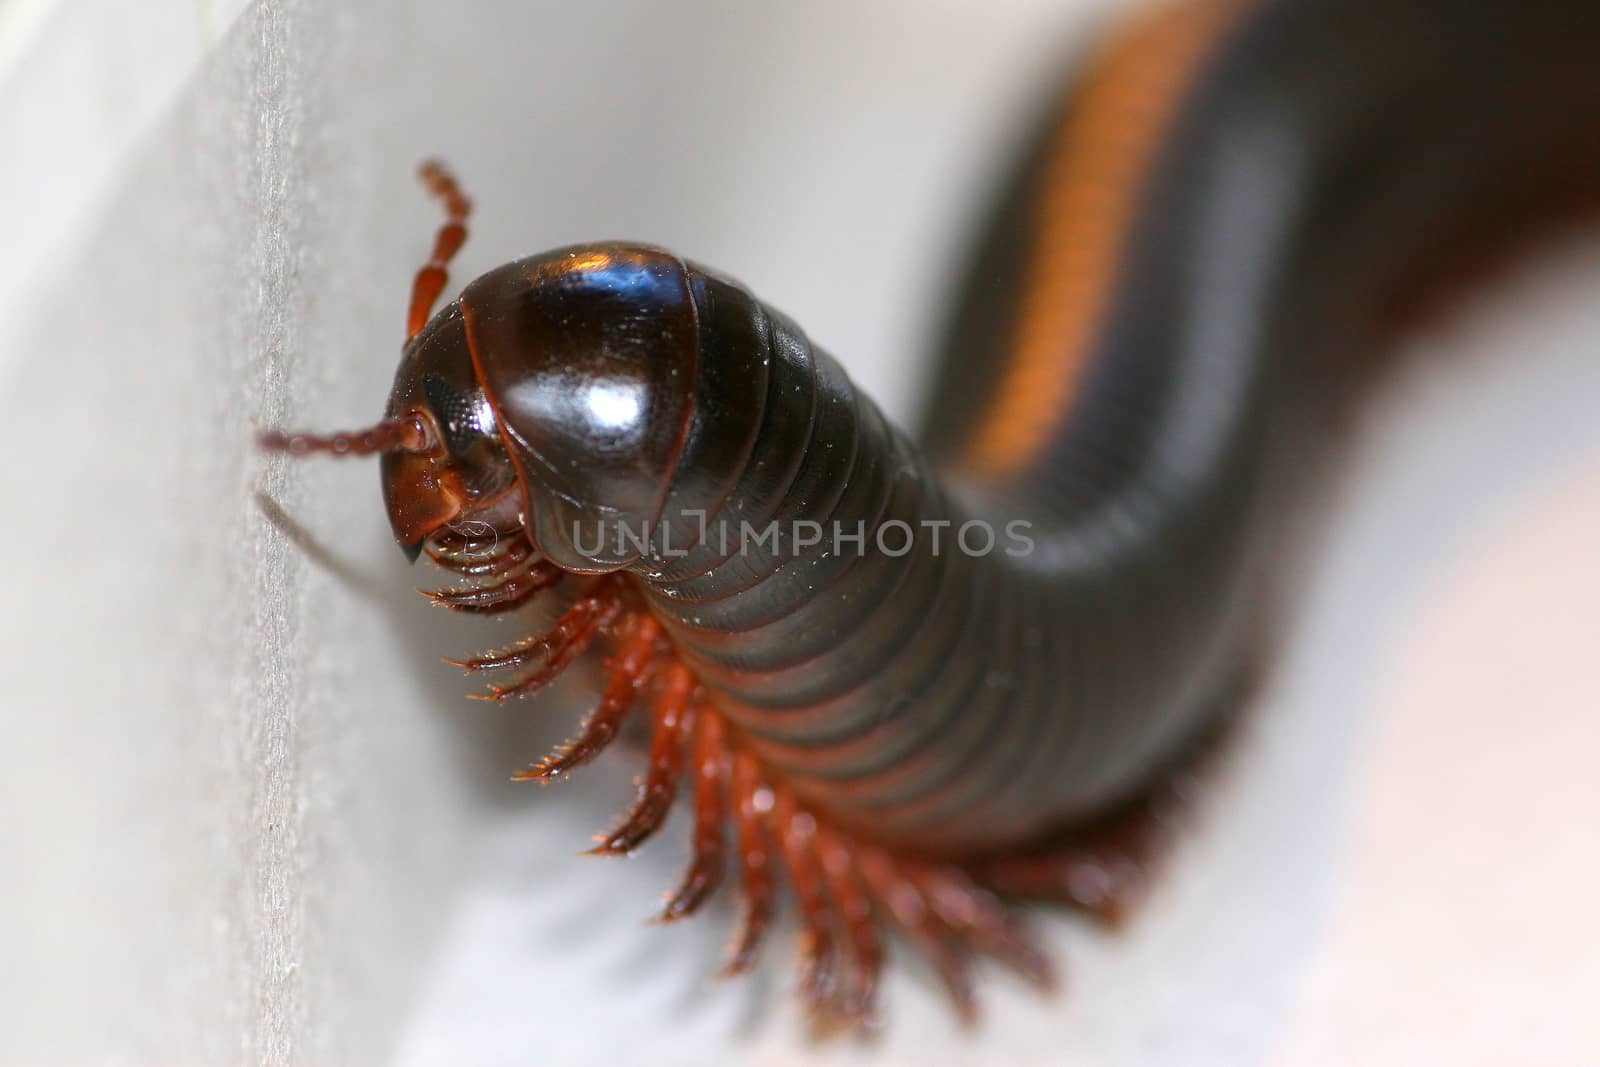 The myriapod living in house conditions